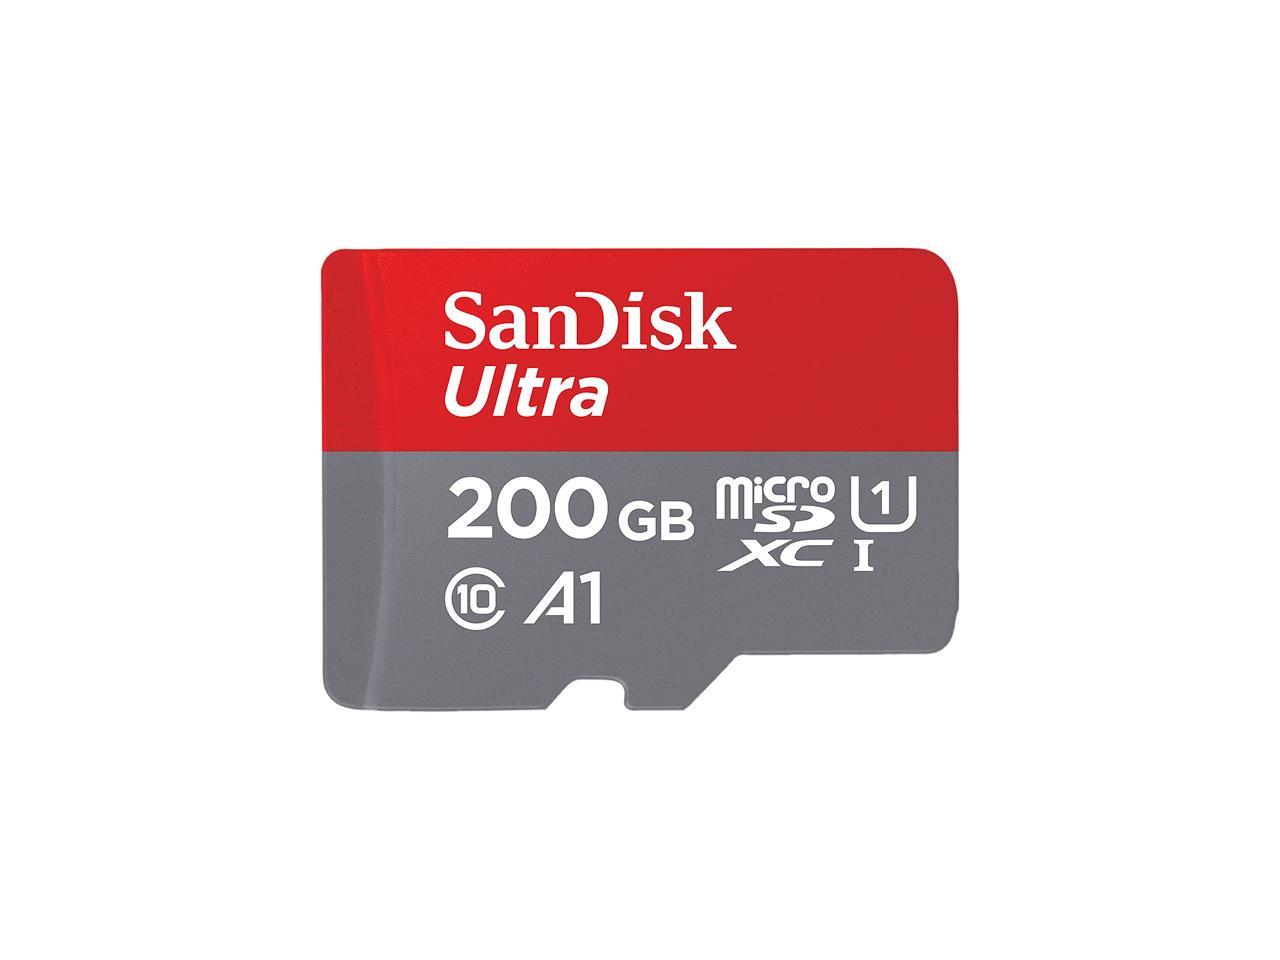 SanDisk Ultra 200GB MicroSDXC Verified for Samsung SM-A910F/DS by SanFlash 100MBs A1 U1 C10 Works with SanDisk 